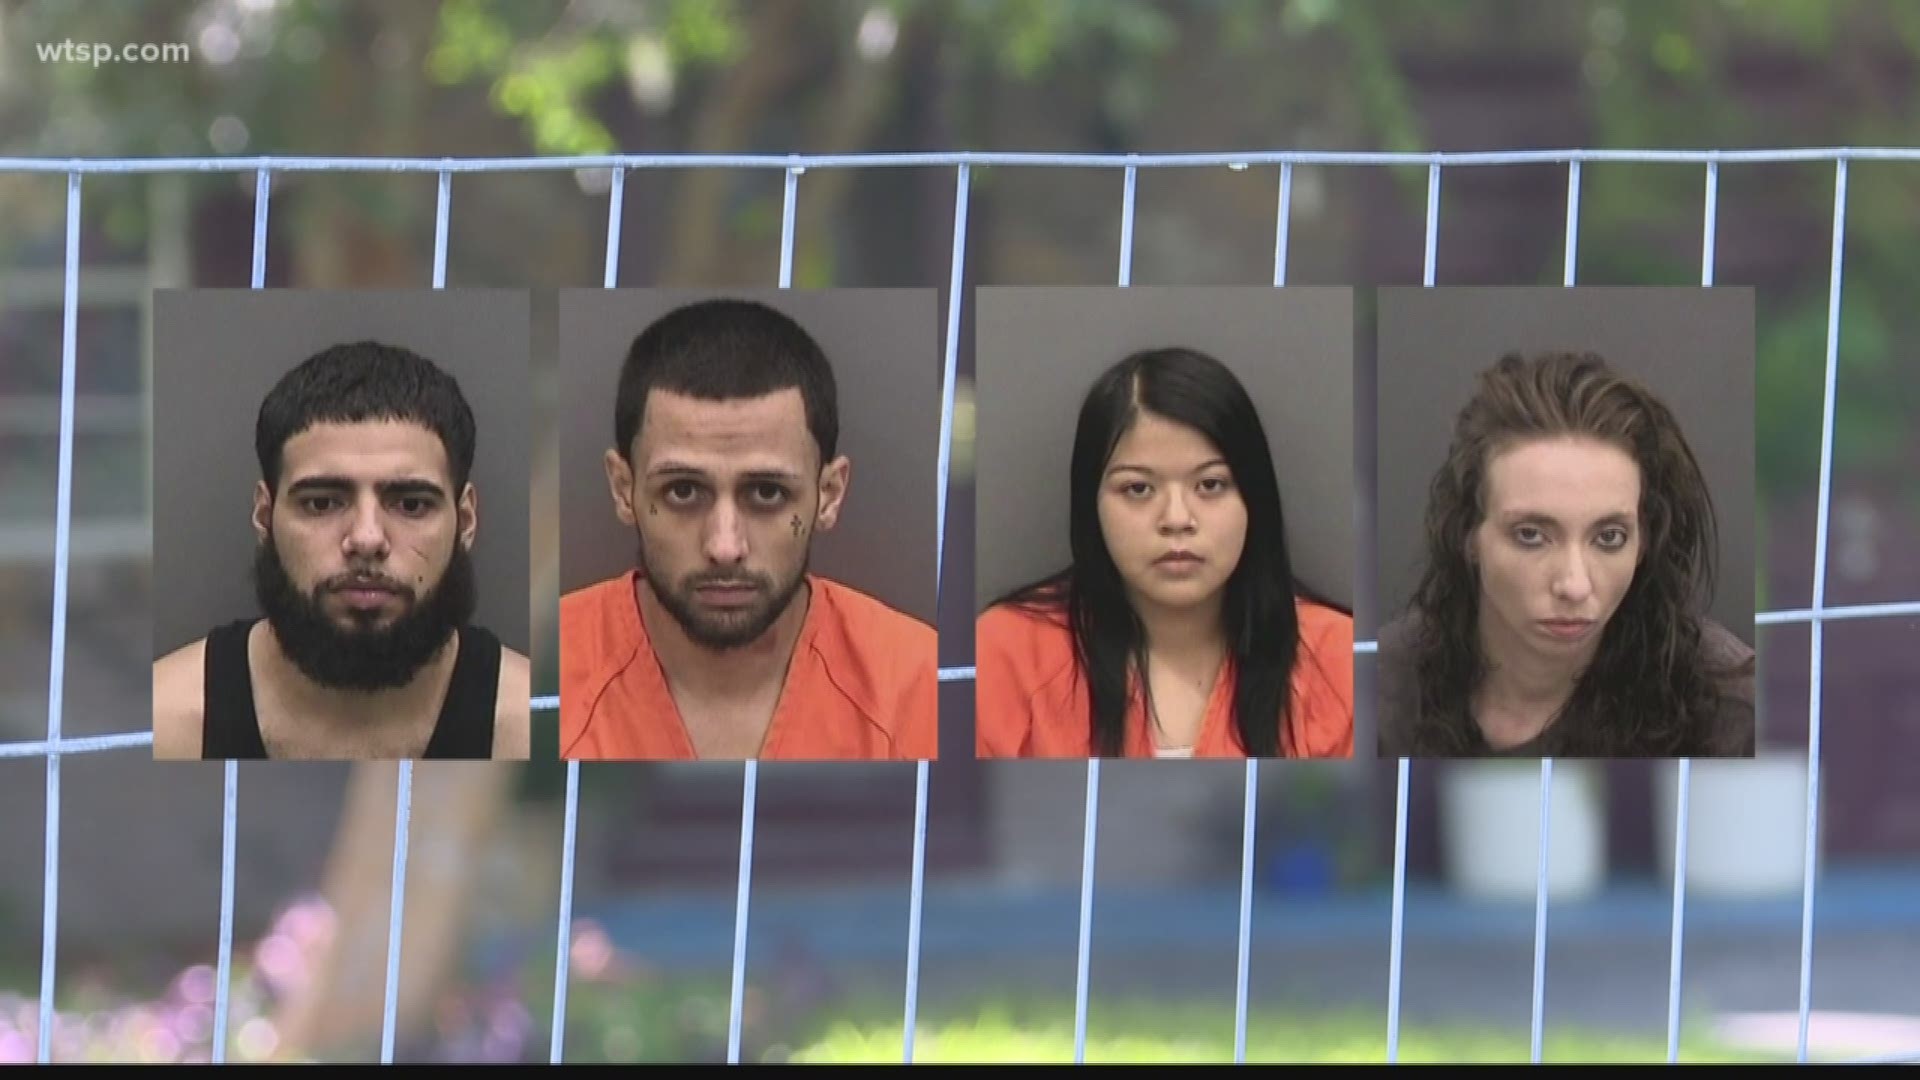 Plant City police say they've arrested four people so far in connection with several incidents of men being lured to a home, beaten and robbed.

Police say the men were lured to a home through social media, believing they would be "socializing with an attractive female." When the men got there, a woman would take them inside, where officers say they were "robbed, viciously tortured and beaten" by the people inside. https://on.wtsp.com/2PbJEqV